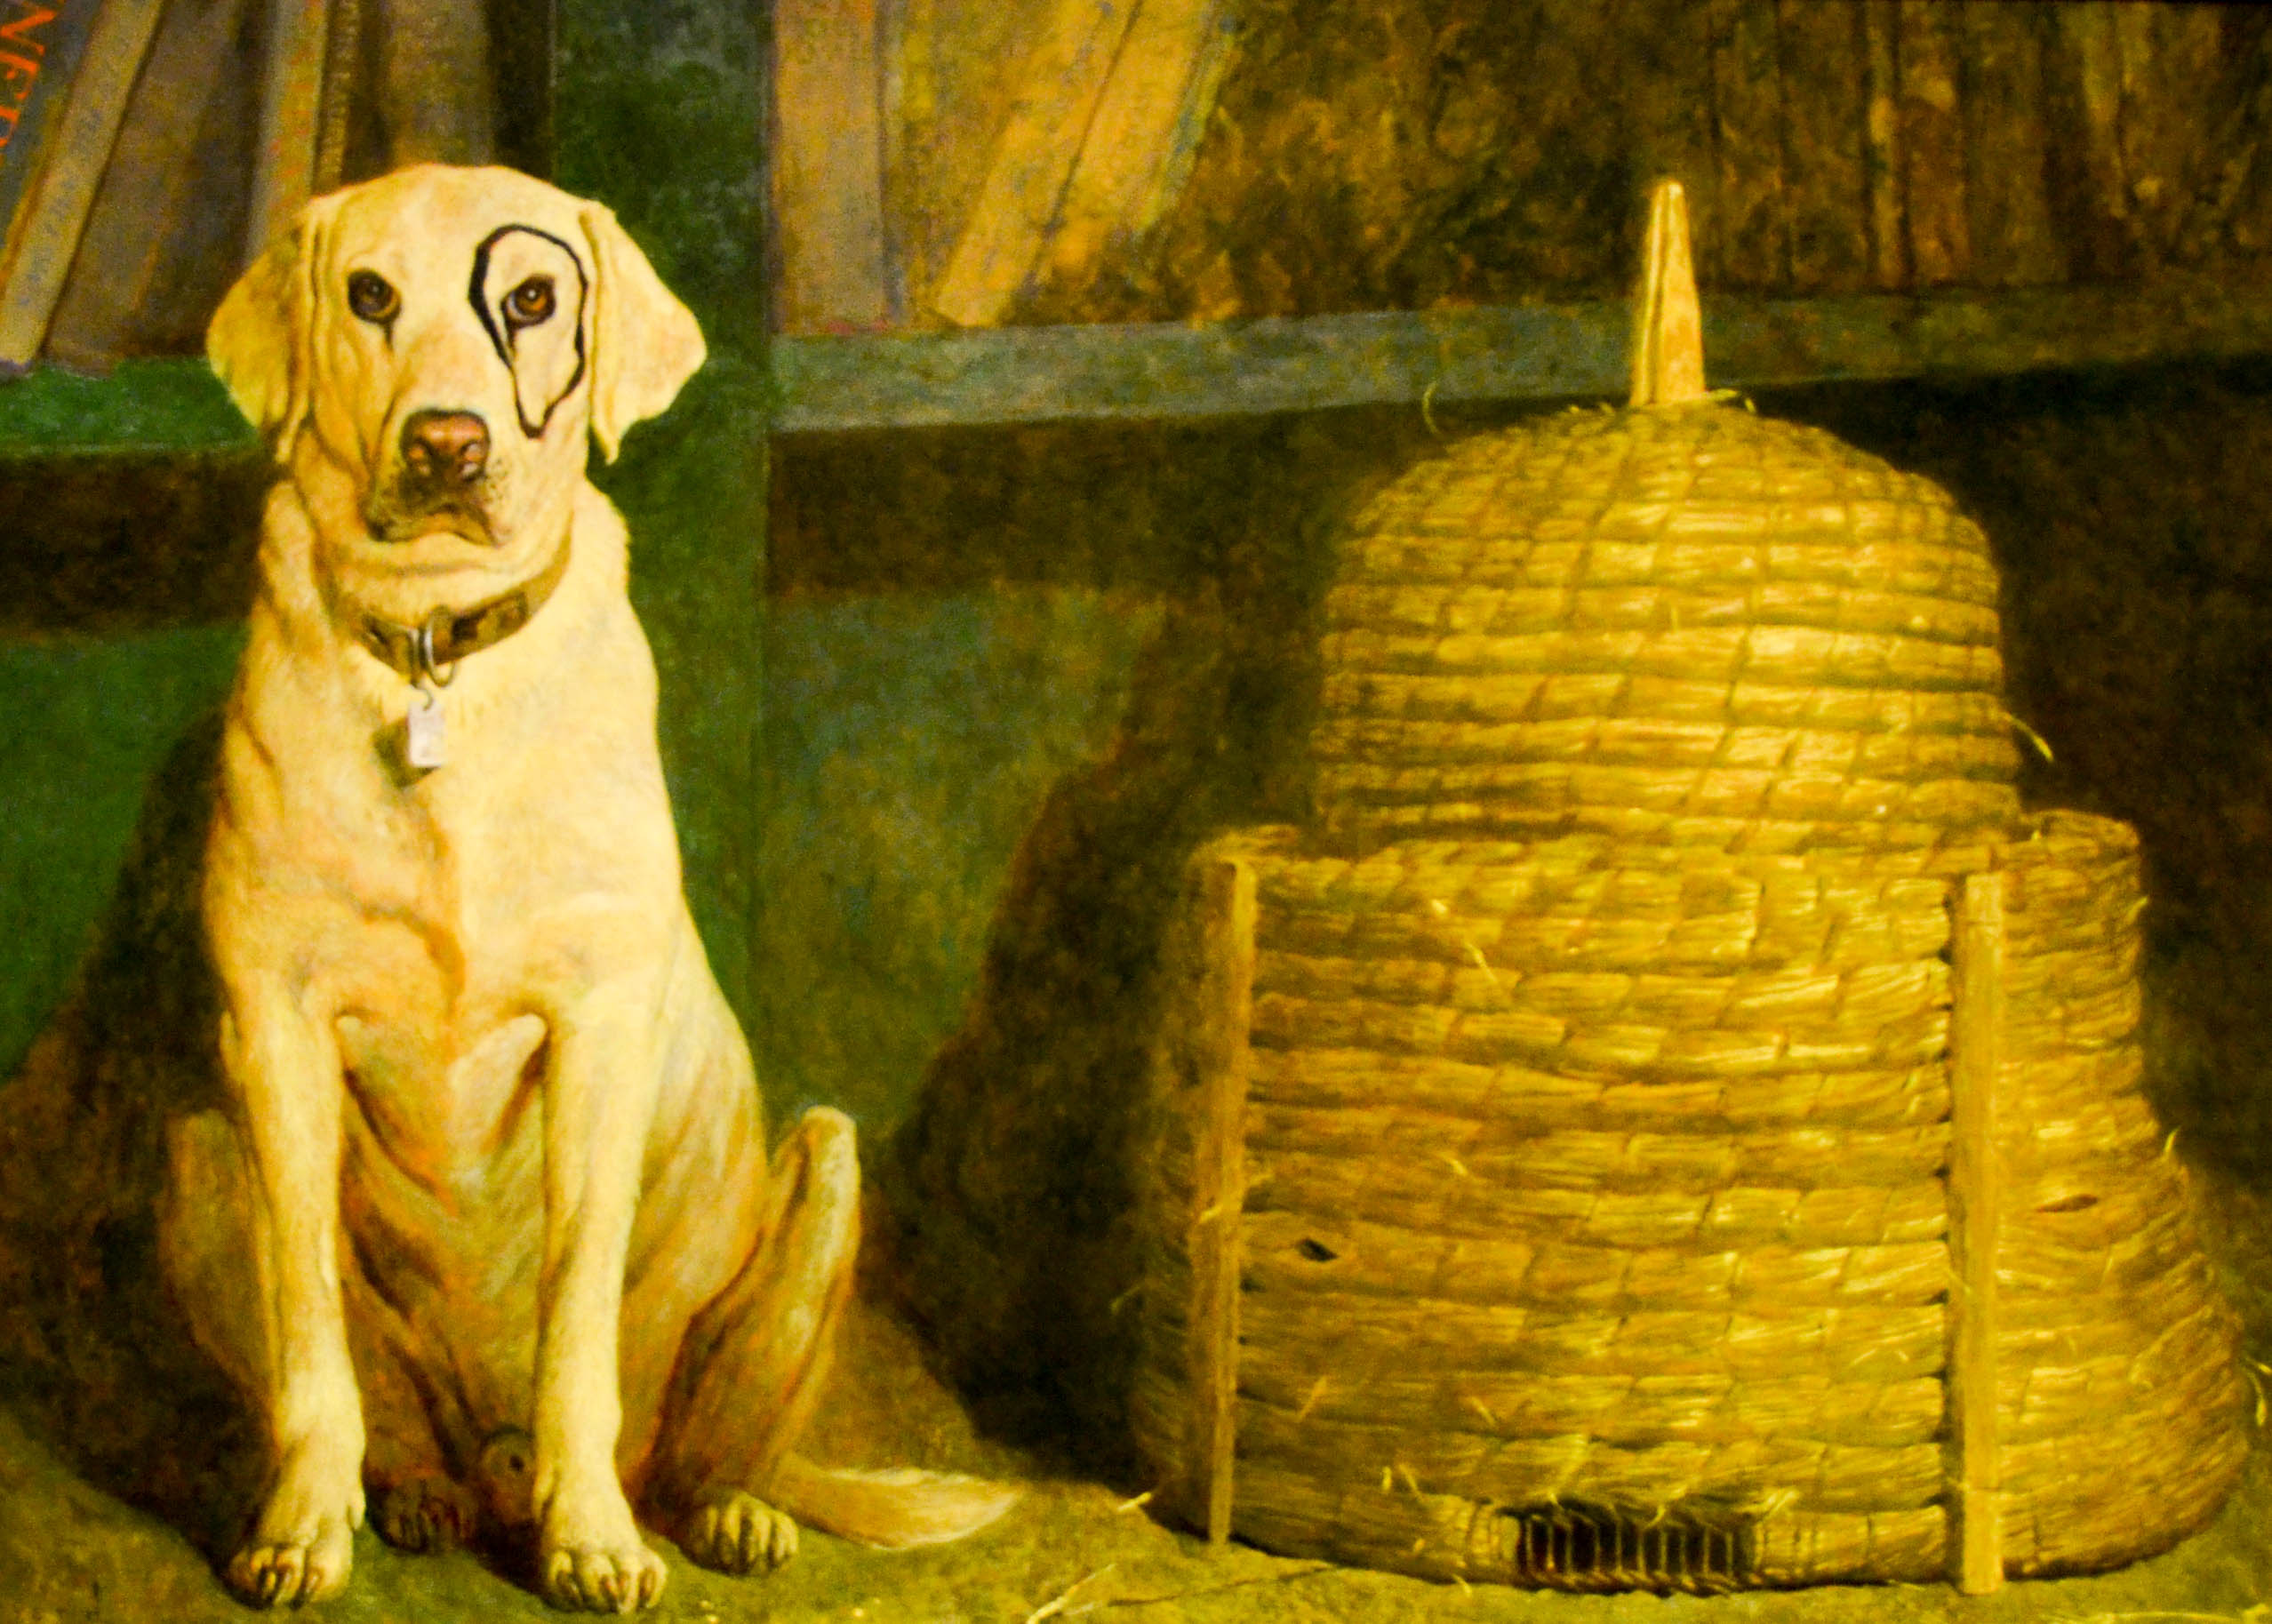 Wyeth's dog appears in a few paintings.